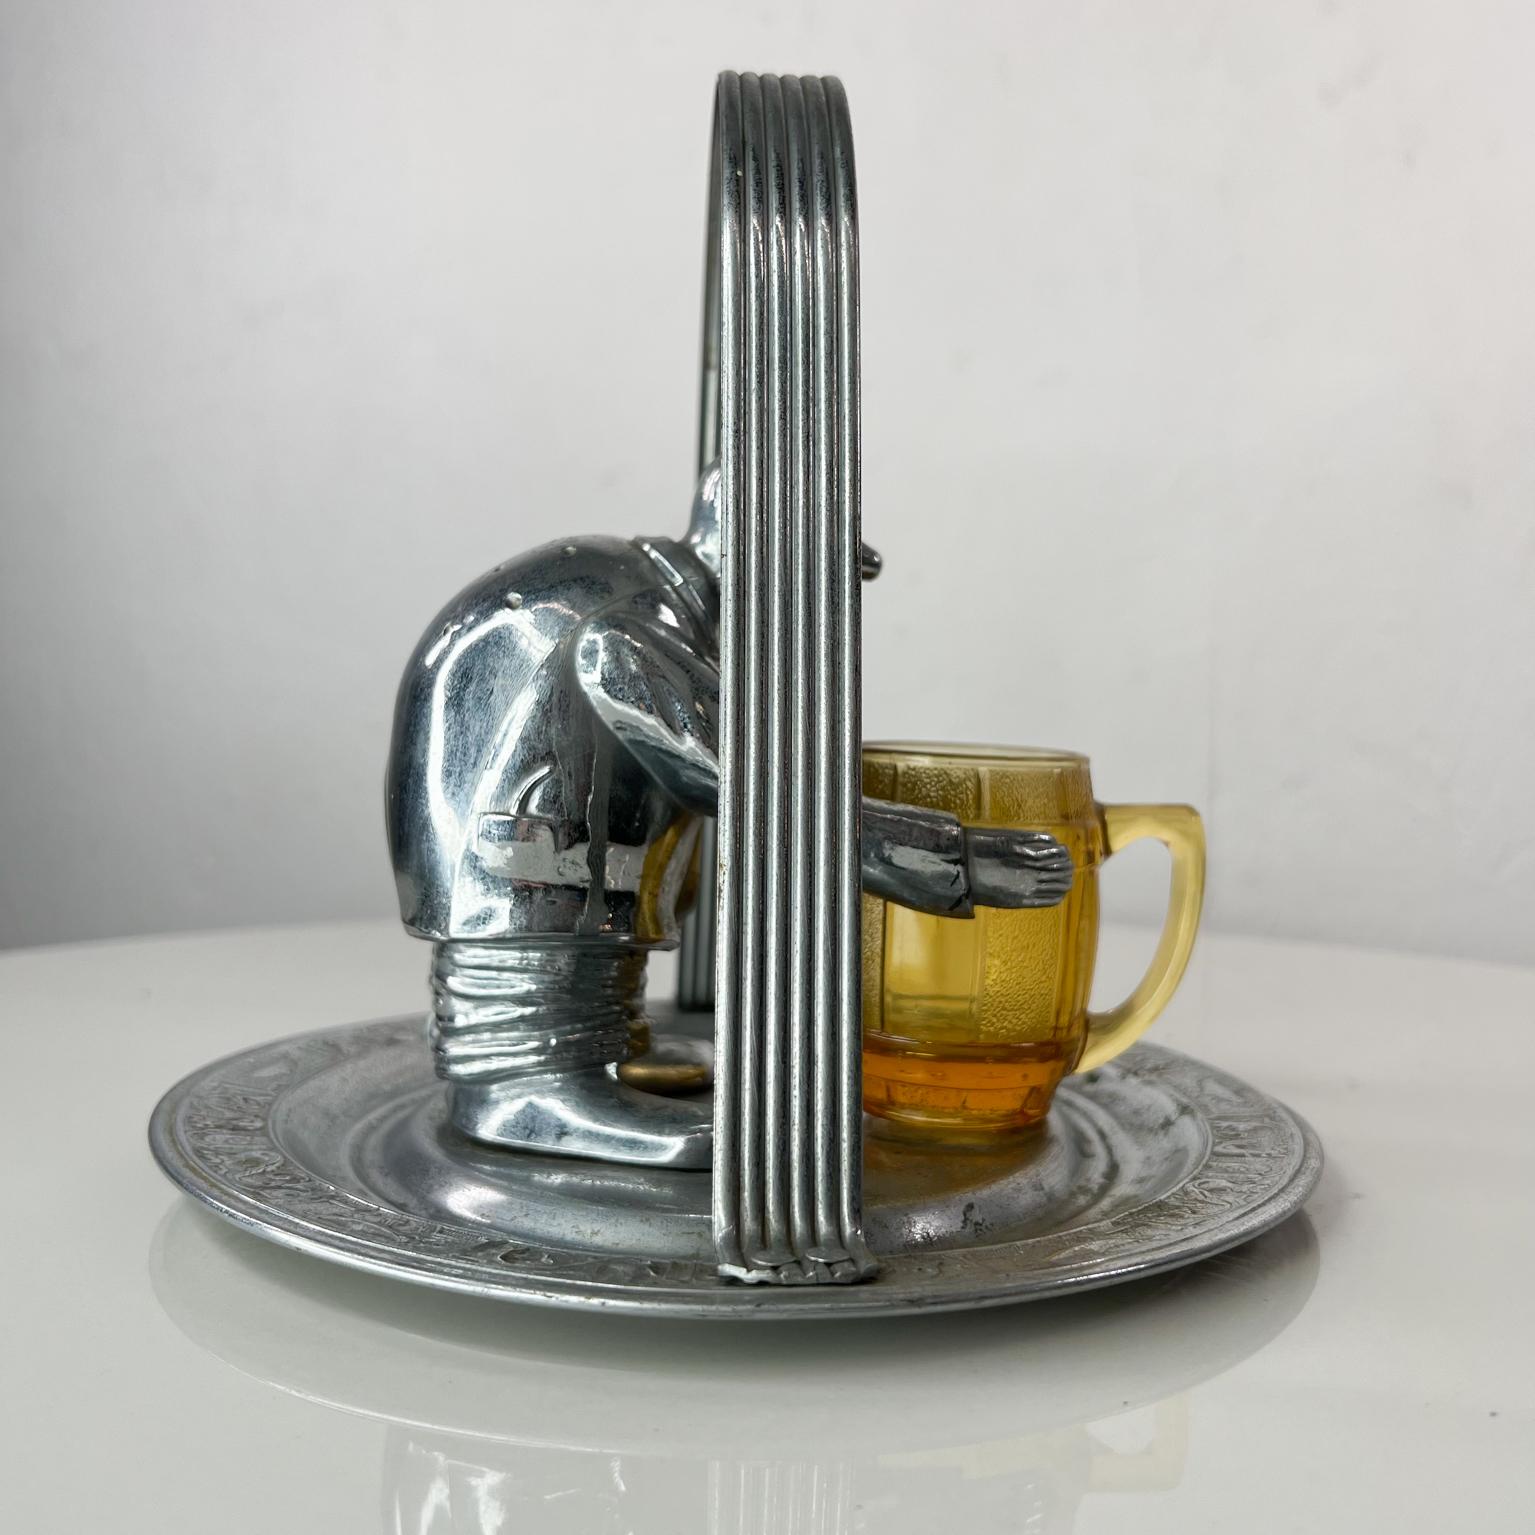 Mid-20th Century 1950s Vintage Butler Buffet Party Condiment Serving Dish National Silver Co